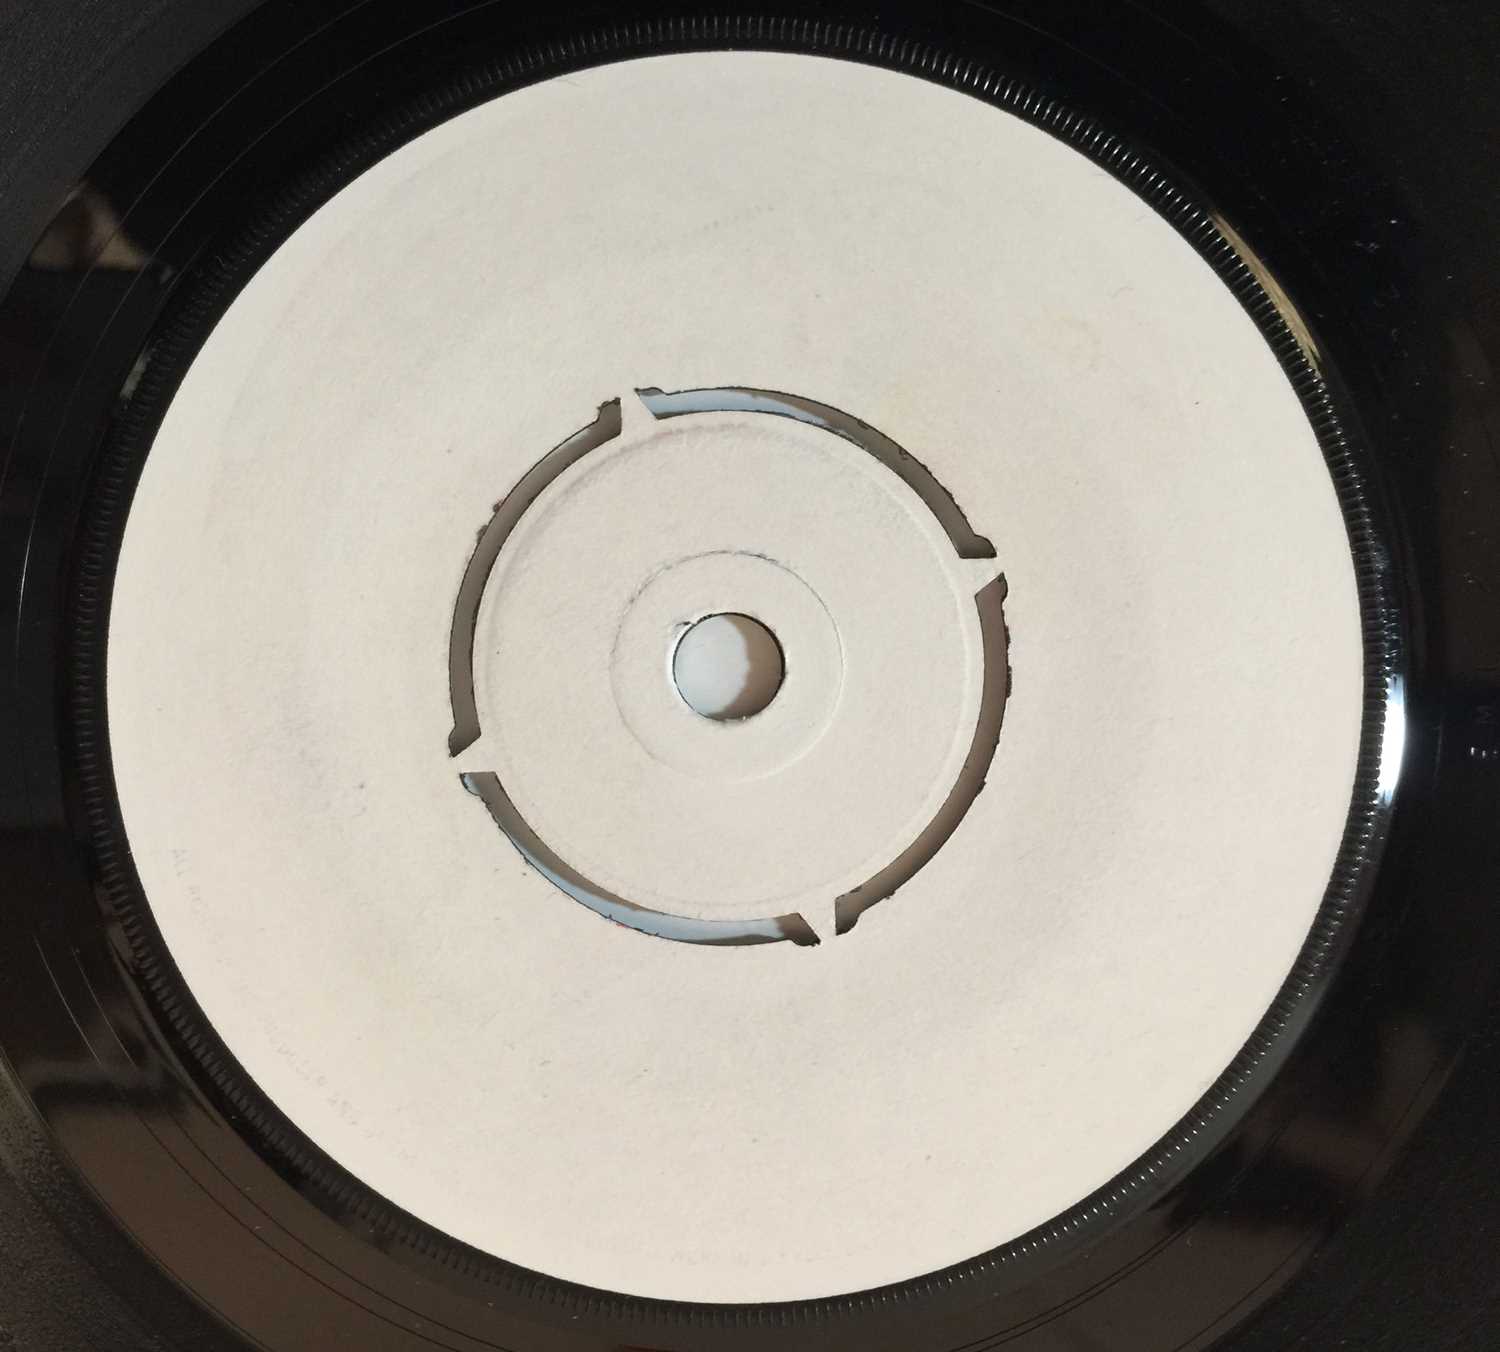 Queen - Somebody To Love 7" (UK White Label Test Pressing - EMI 2565 - Image 2 of 4